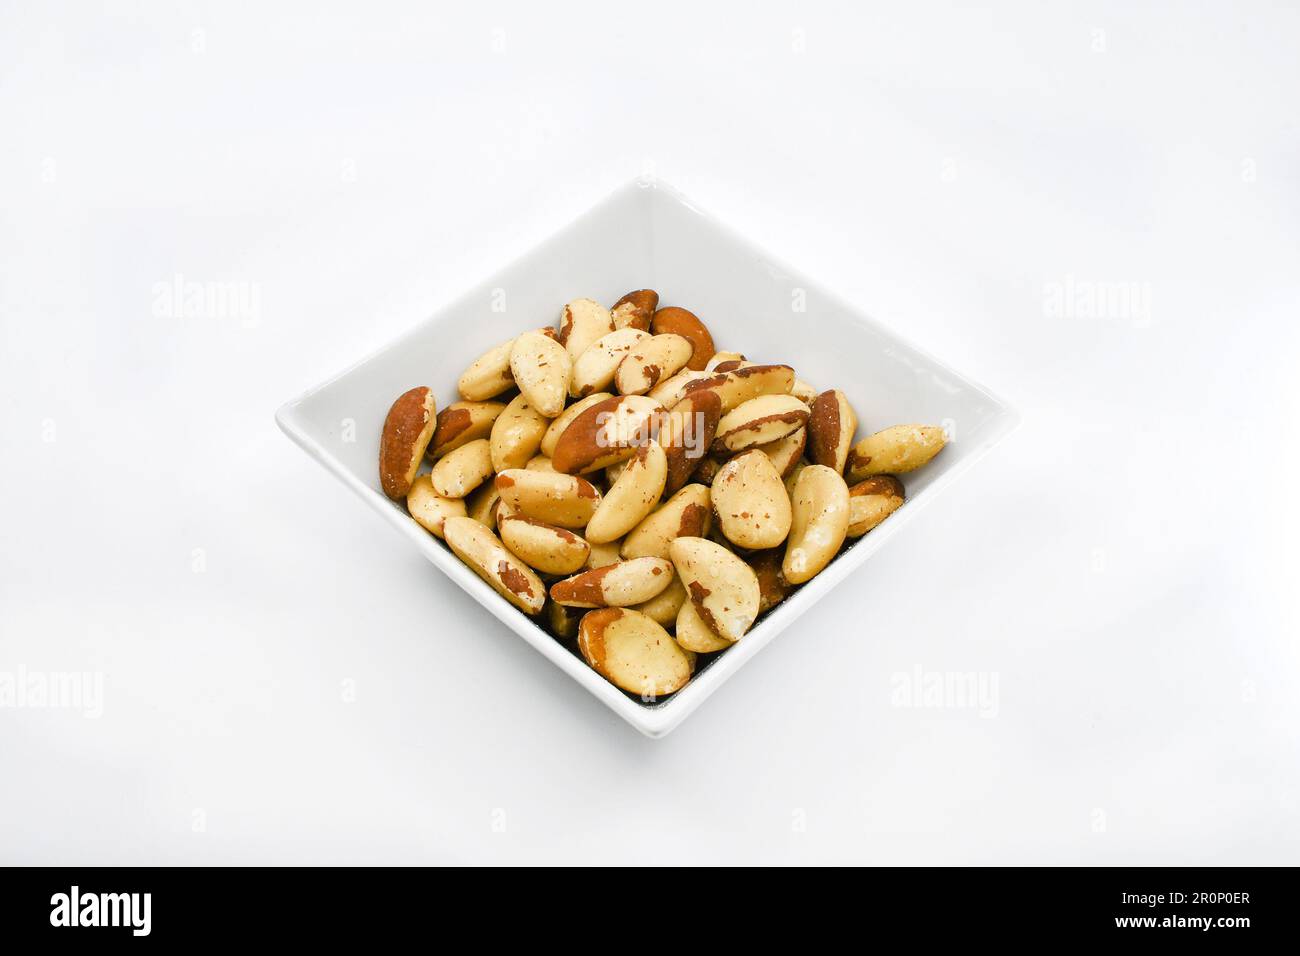 White square shaped dish with brazil nuts isolated on a plain white background. Copy space. Stock Photo